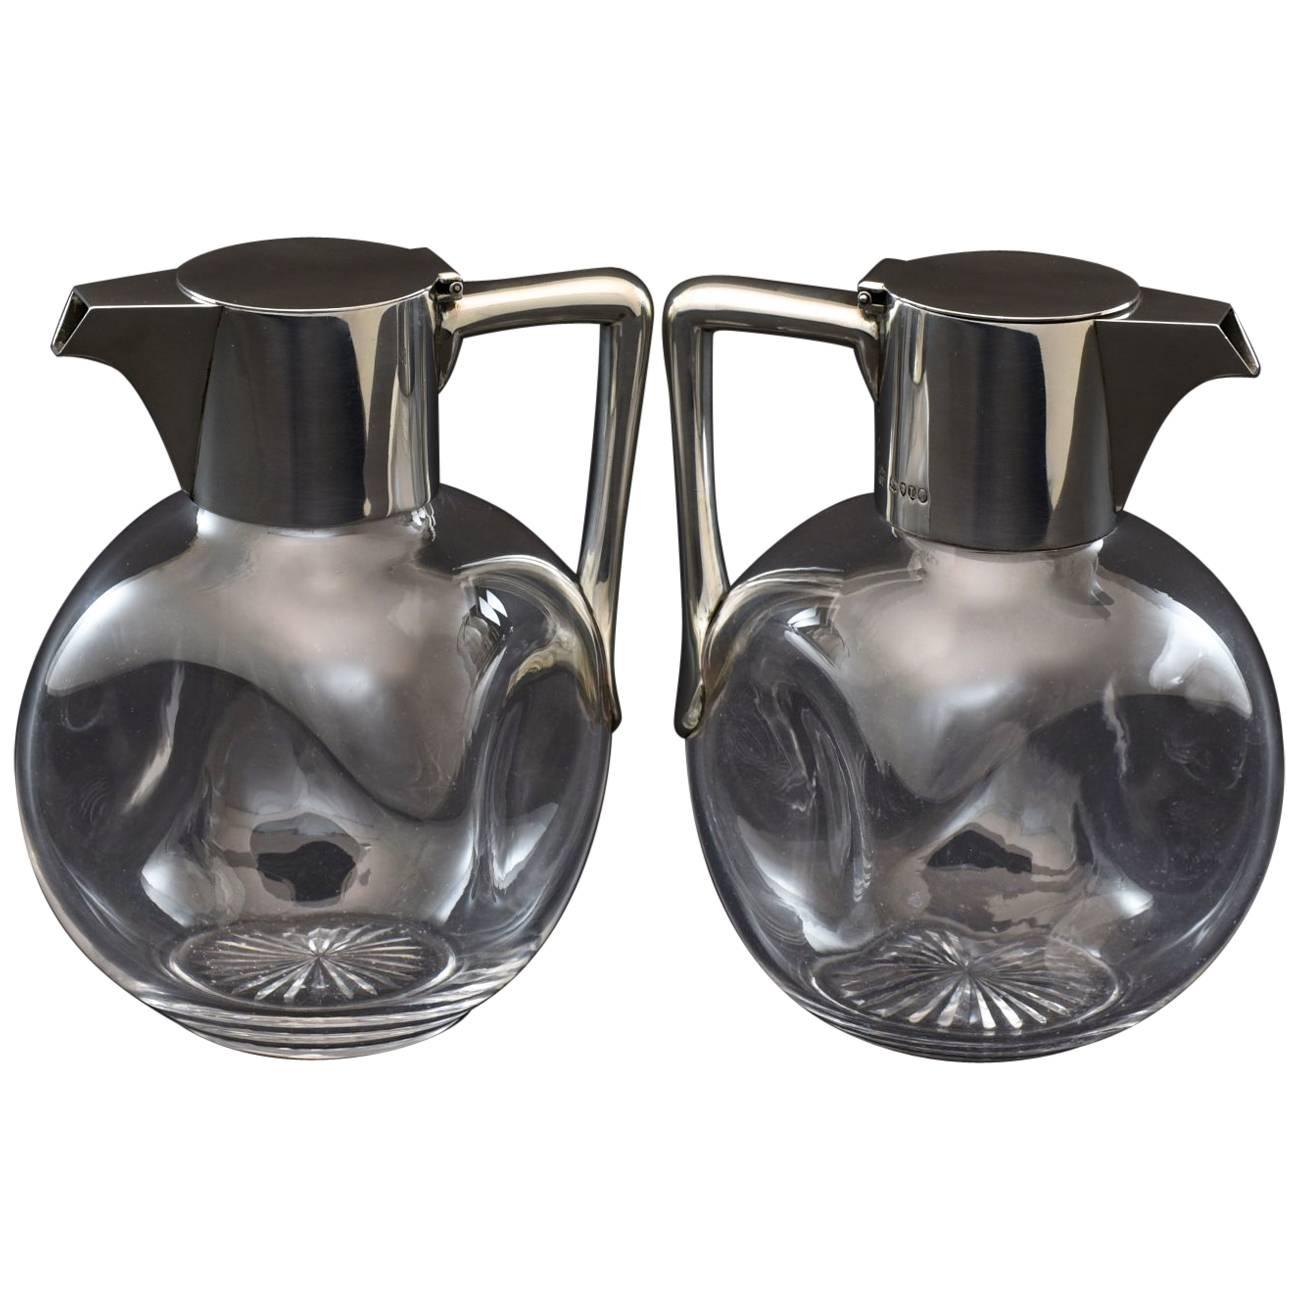 Pair of Silver and Cut-Glass Claret Jugs